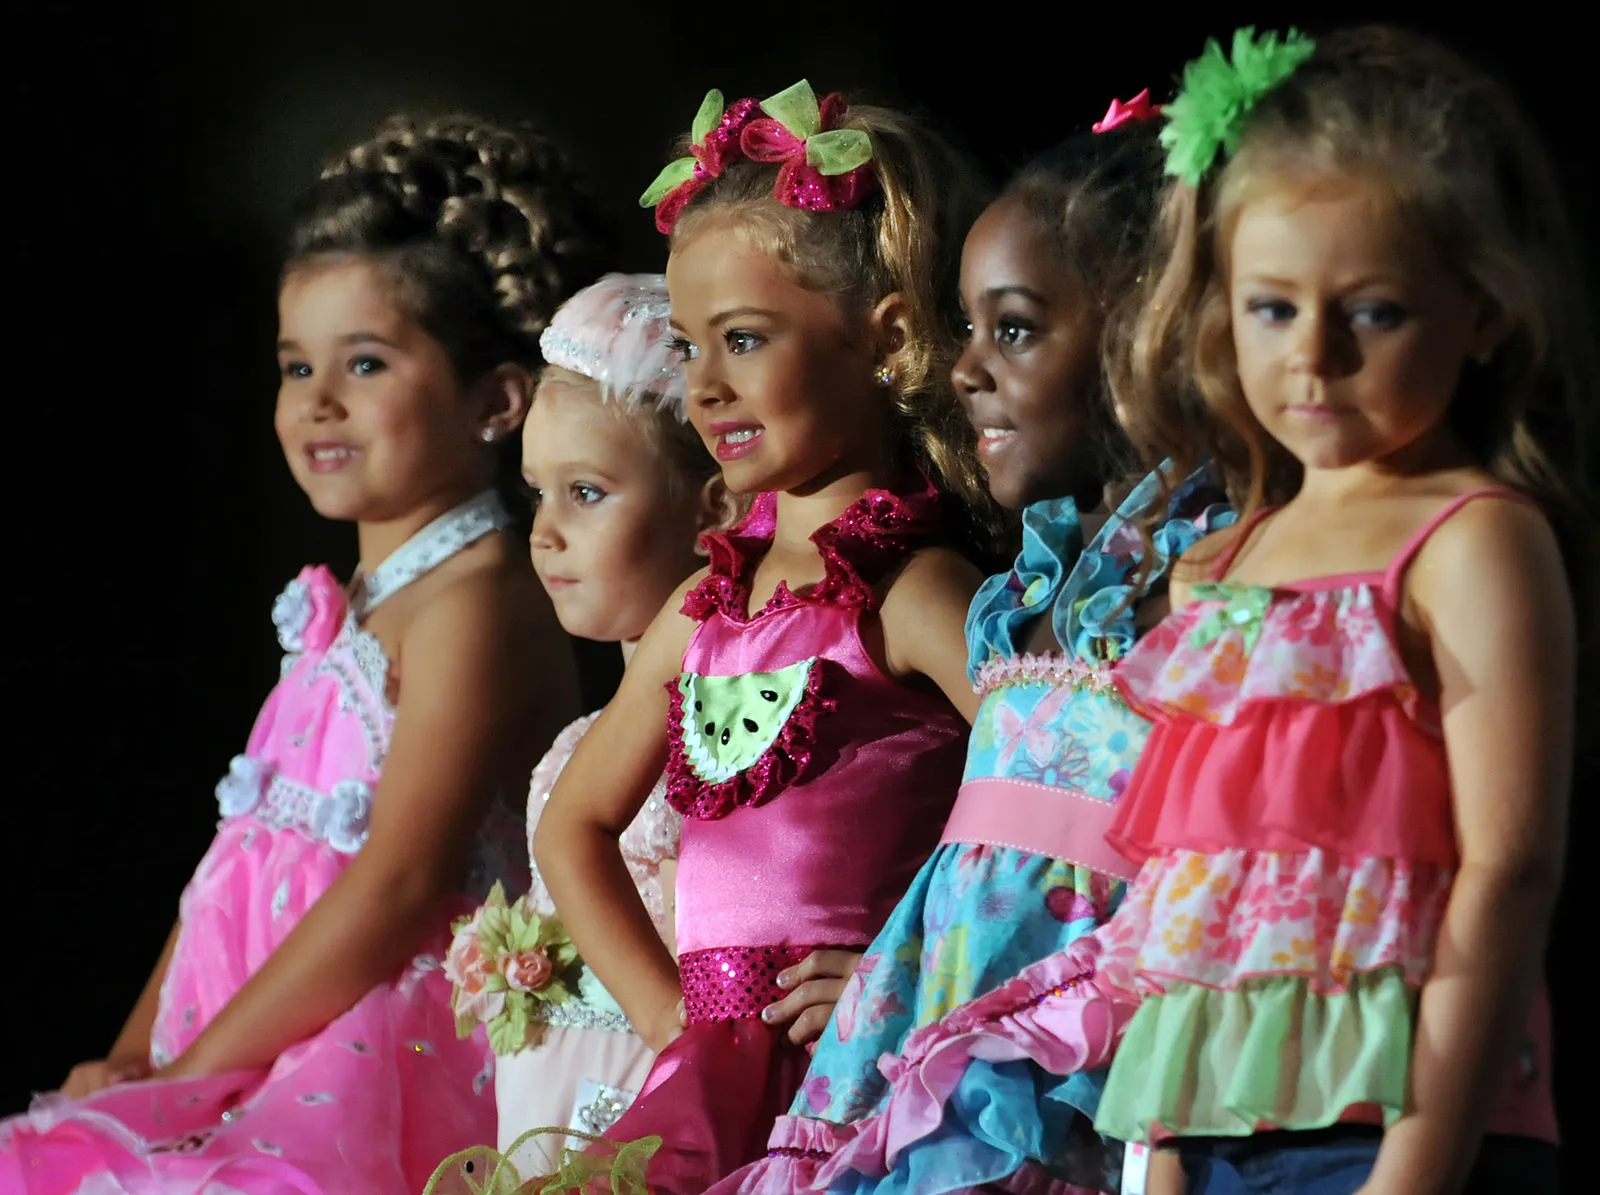 France Bans Child Beauty Pageants, America Unlikely to Follow, Smart News